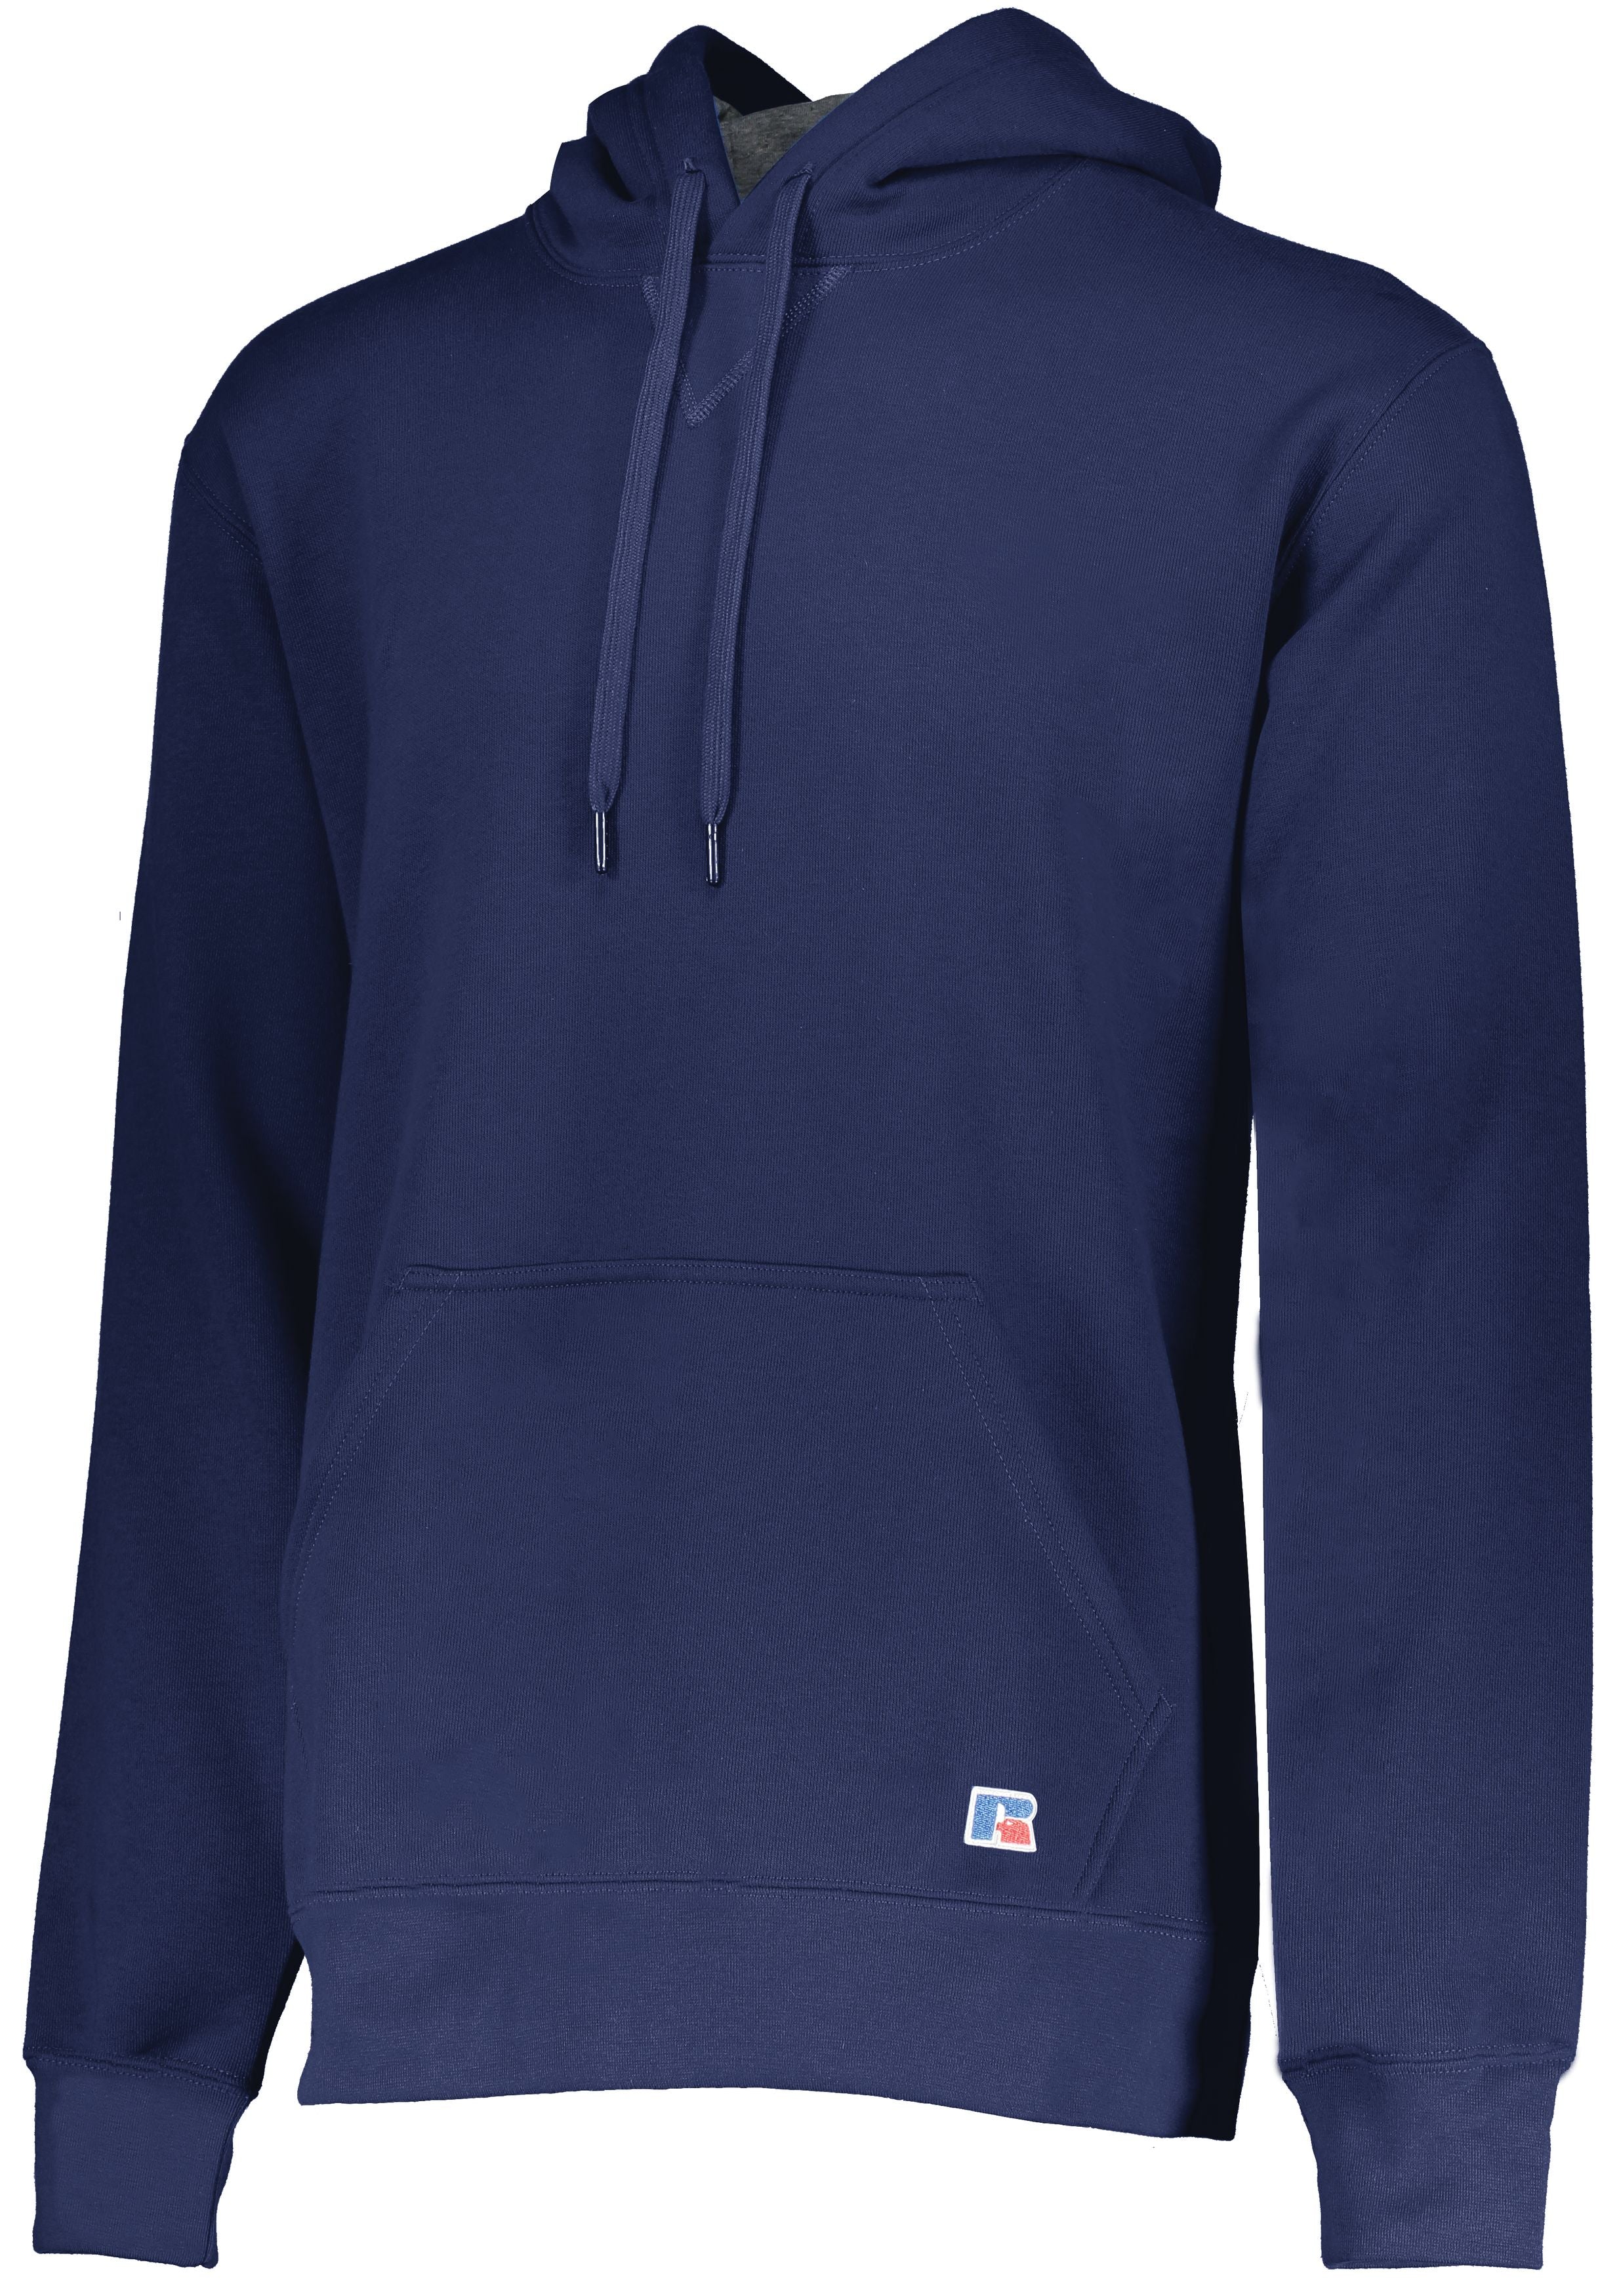 Russell Athletic 80/20 Fleece Hoodie in Navy  -Part of the Adult, Russell-Athletic-Products, Shirts product lines at KanaleyCreations.com